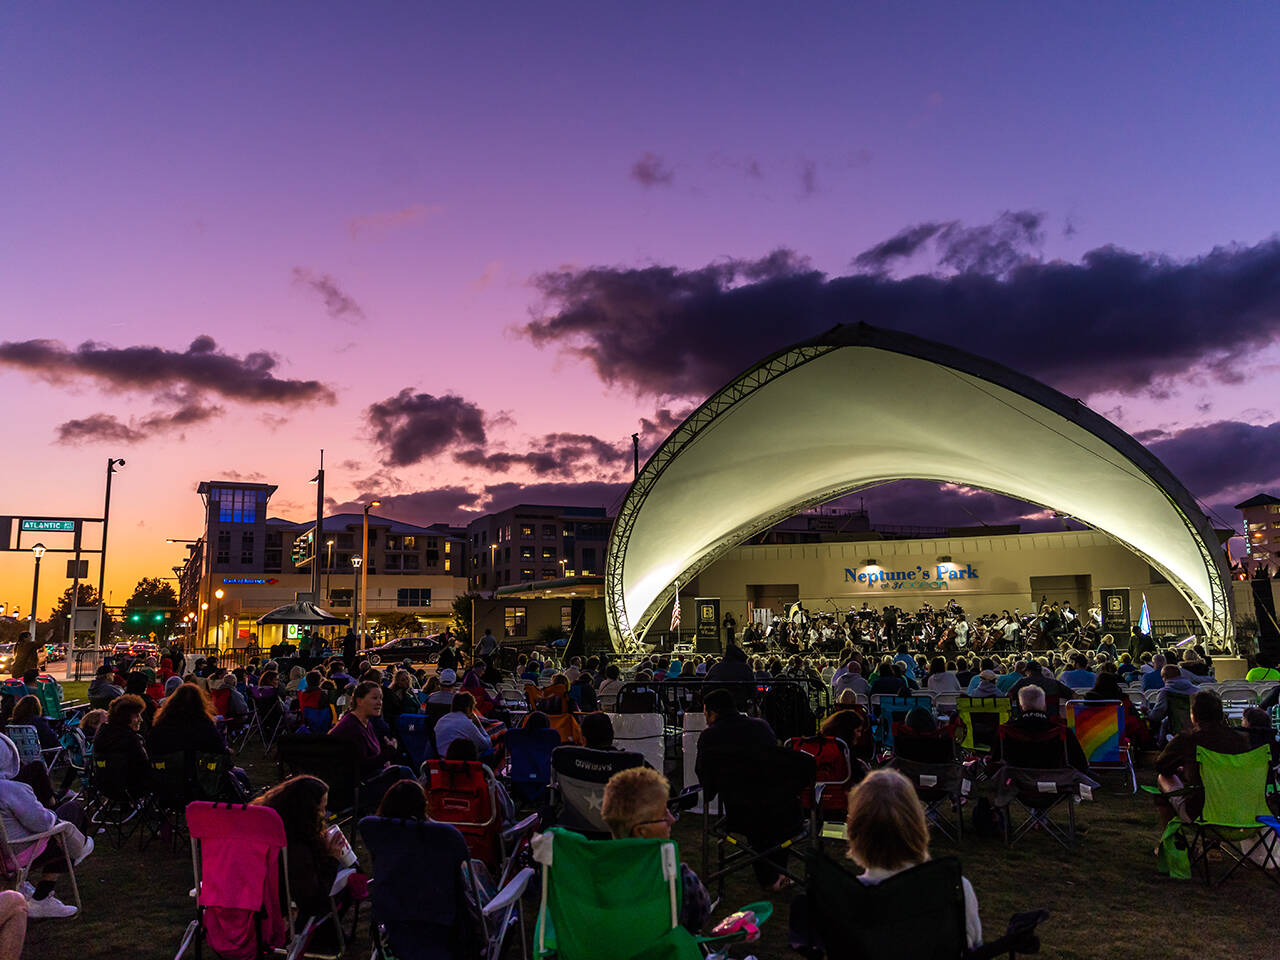 Symphony by the Sea at dusk